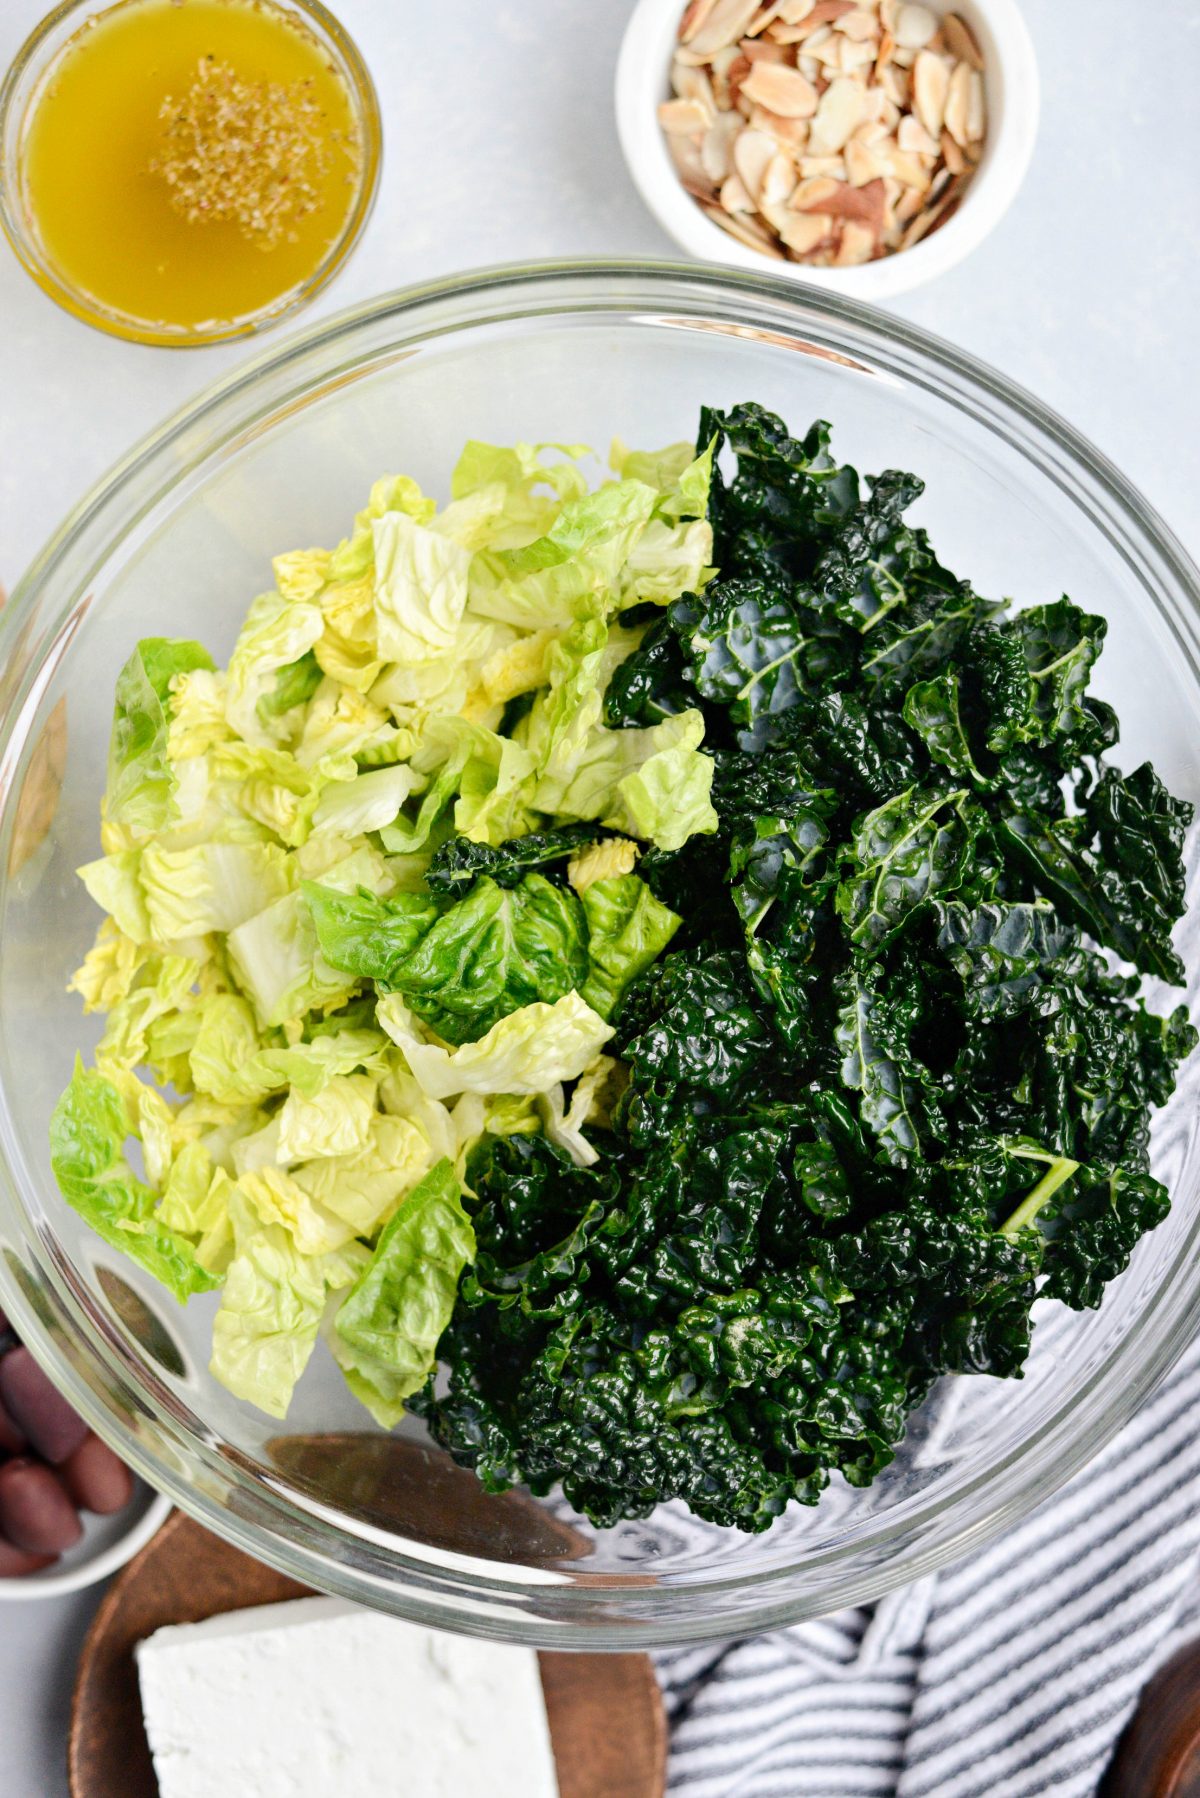 strip the leaves off of the kale and add it to a bowl with chopped romaine